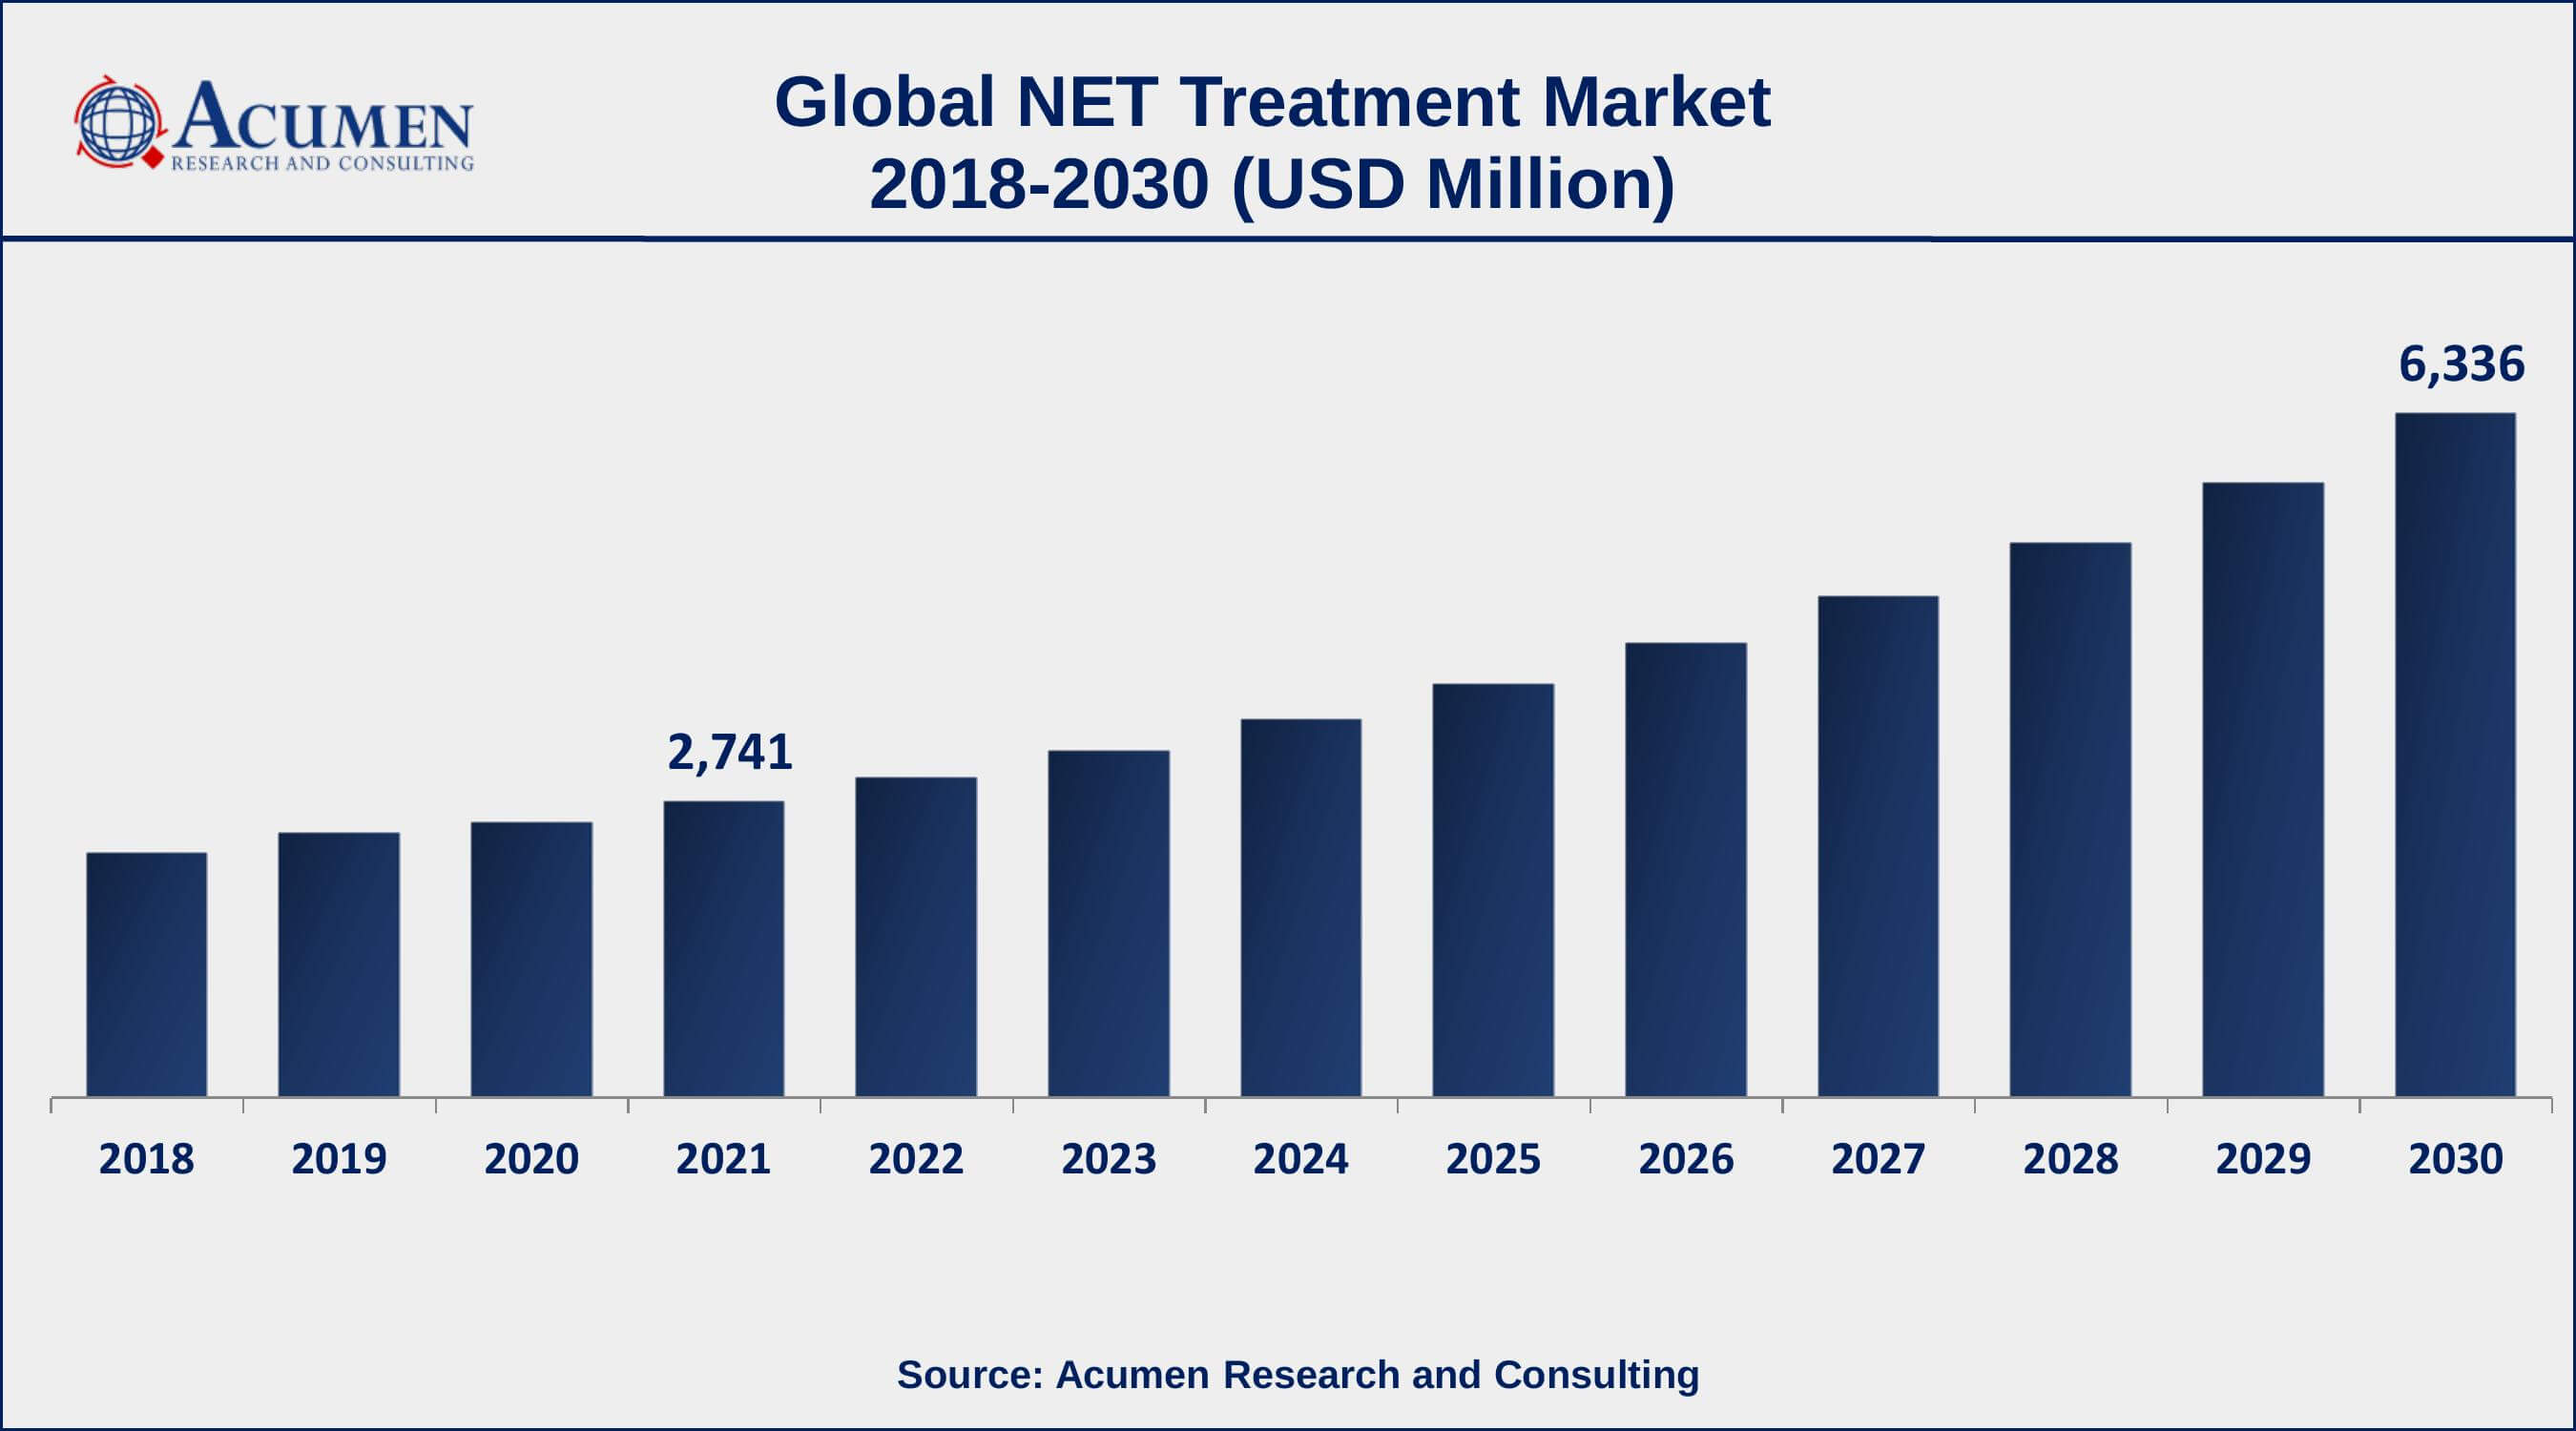 Europe and Asia-Pacific NET treatment market growth will observe fastest CAGR from 2022 to 2030